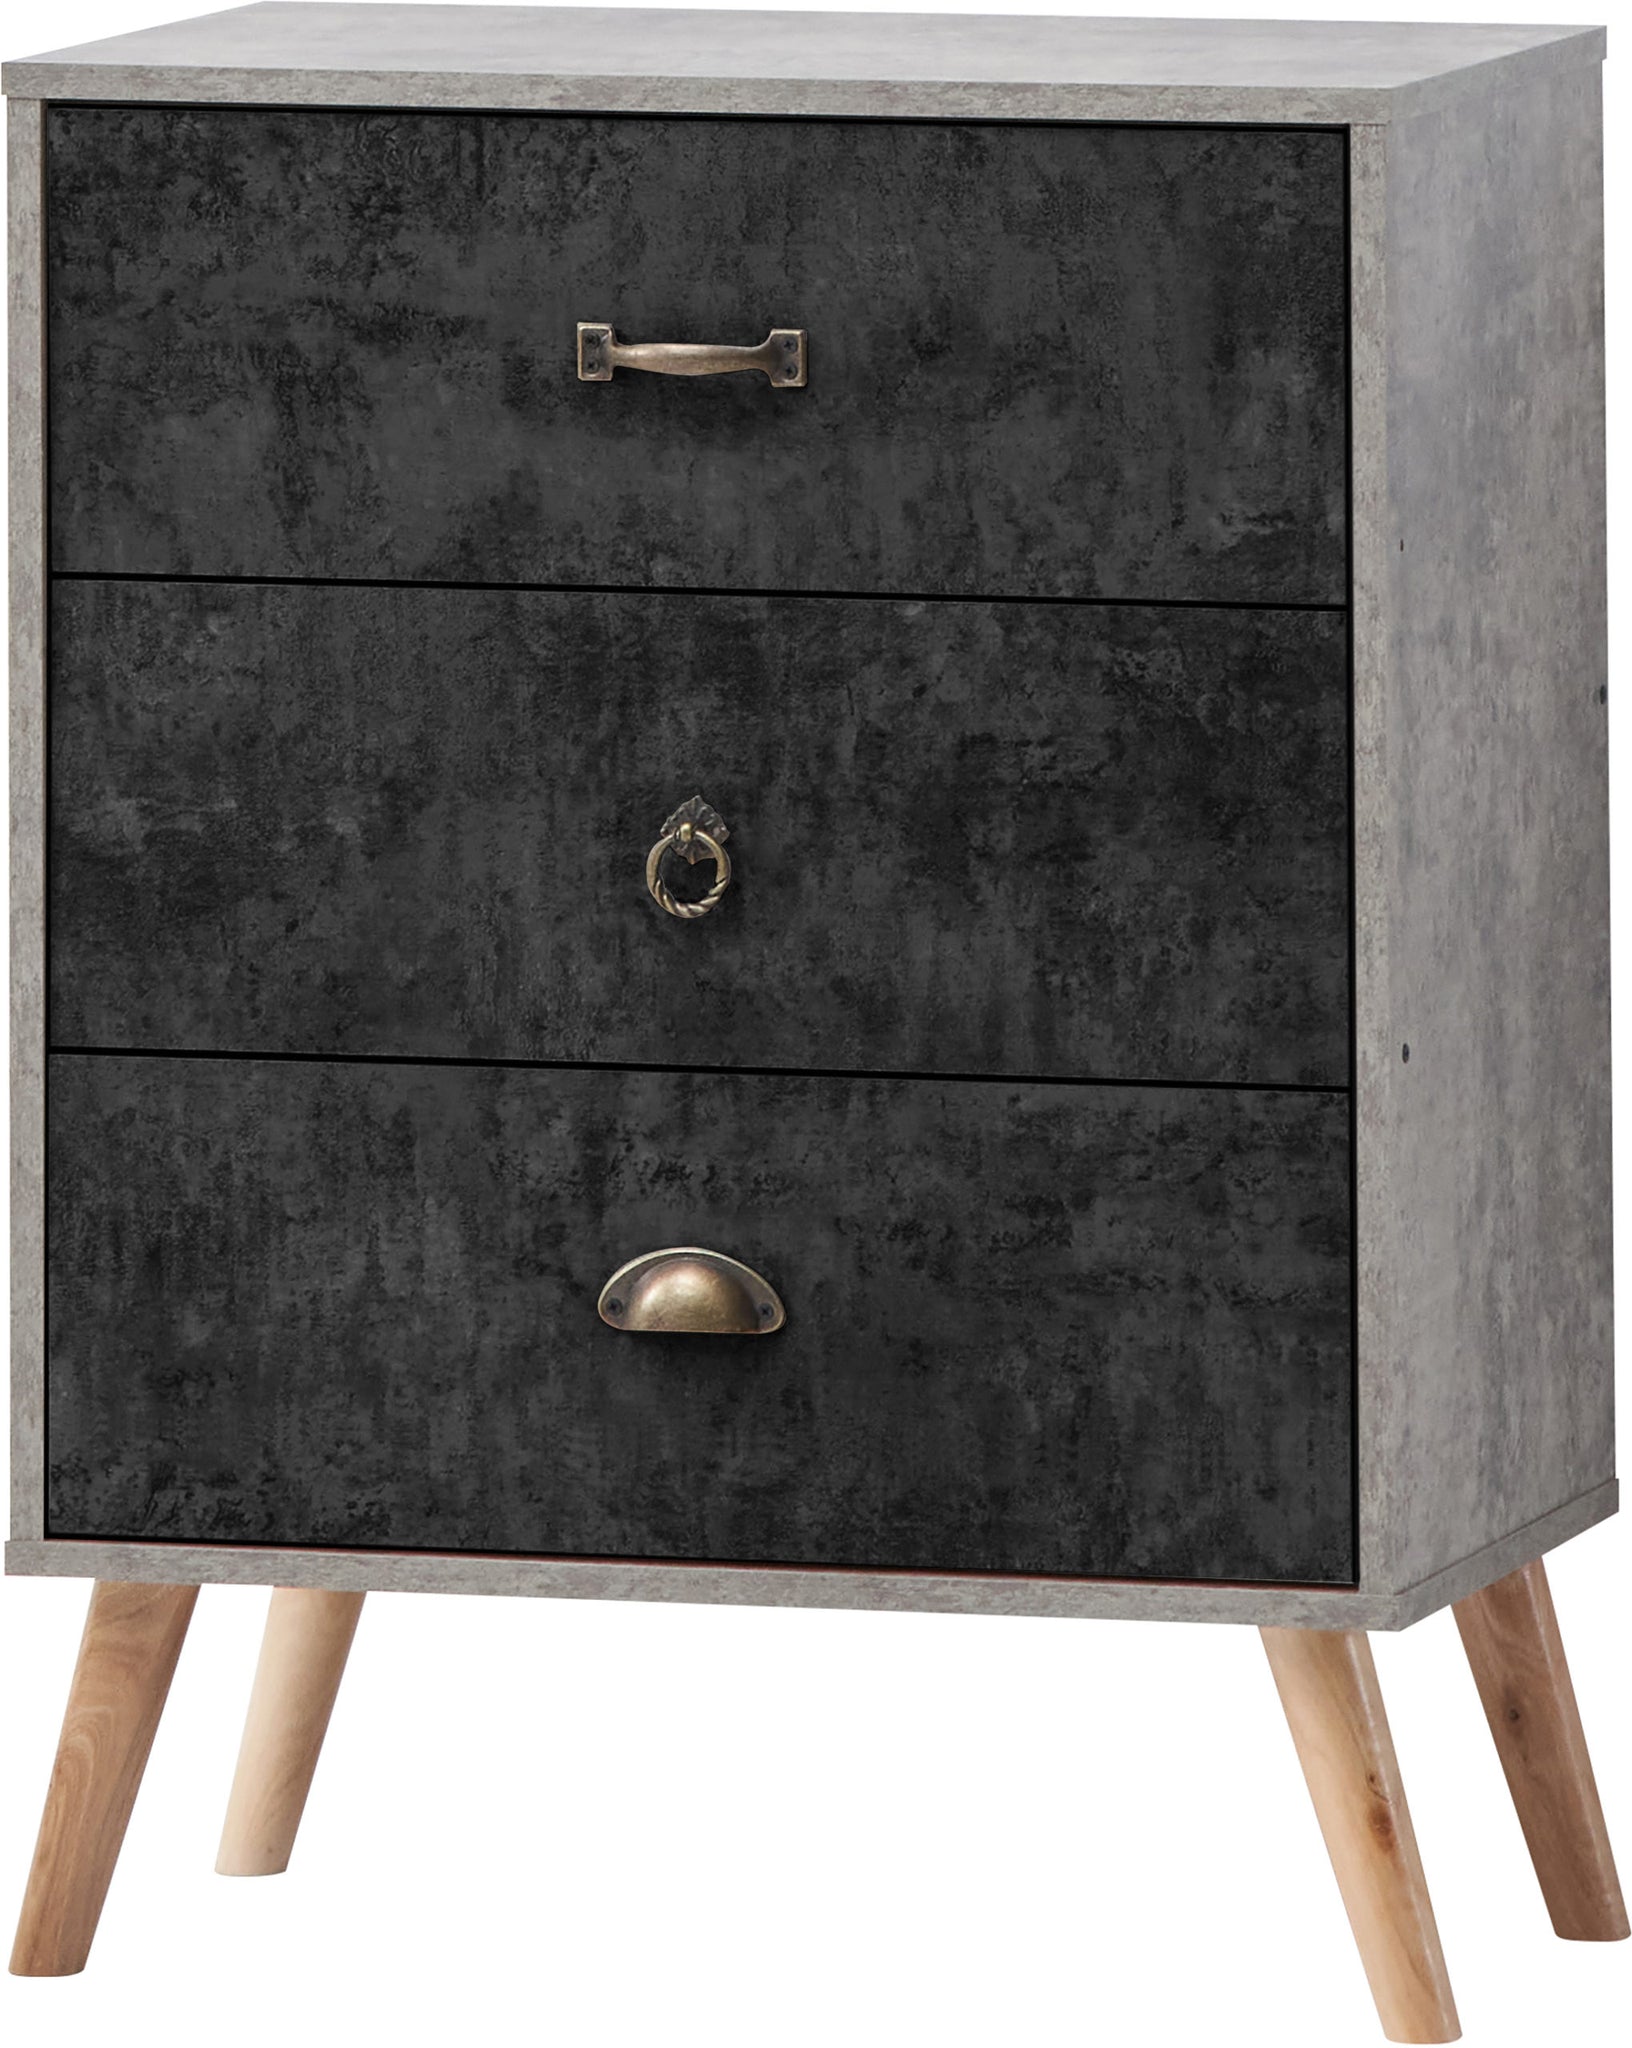 NORDIC-3-DRAWER-CHEST-GREYCHARCOAL-CONCRETE-EFFECT-2021-100-102-155-F-scaled.jpg